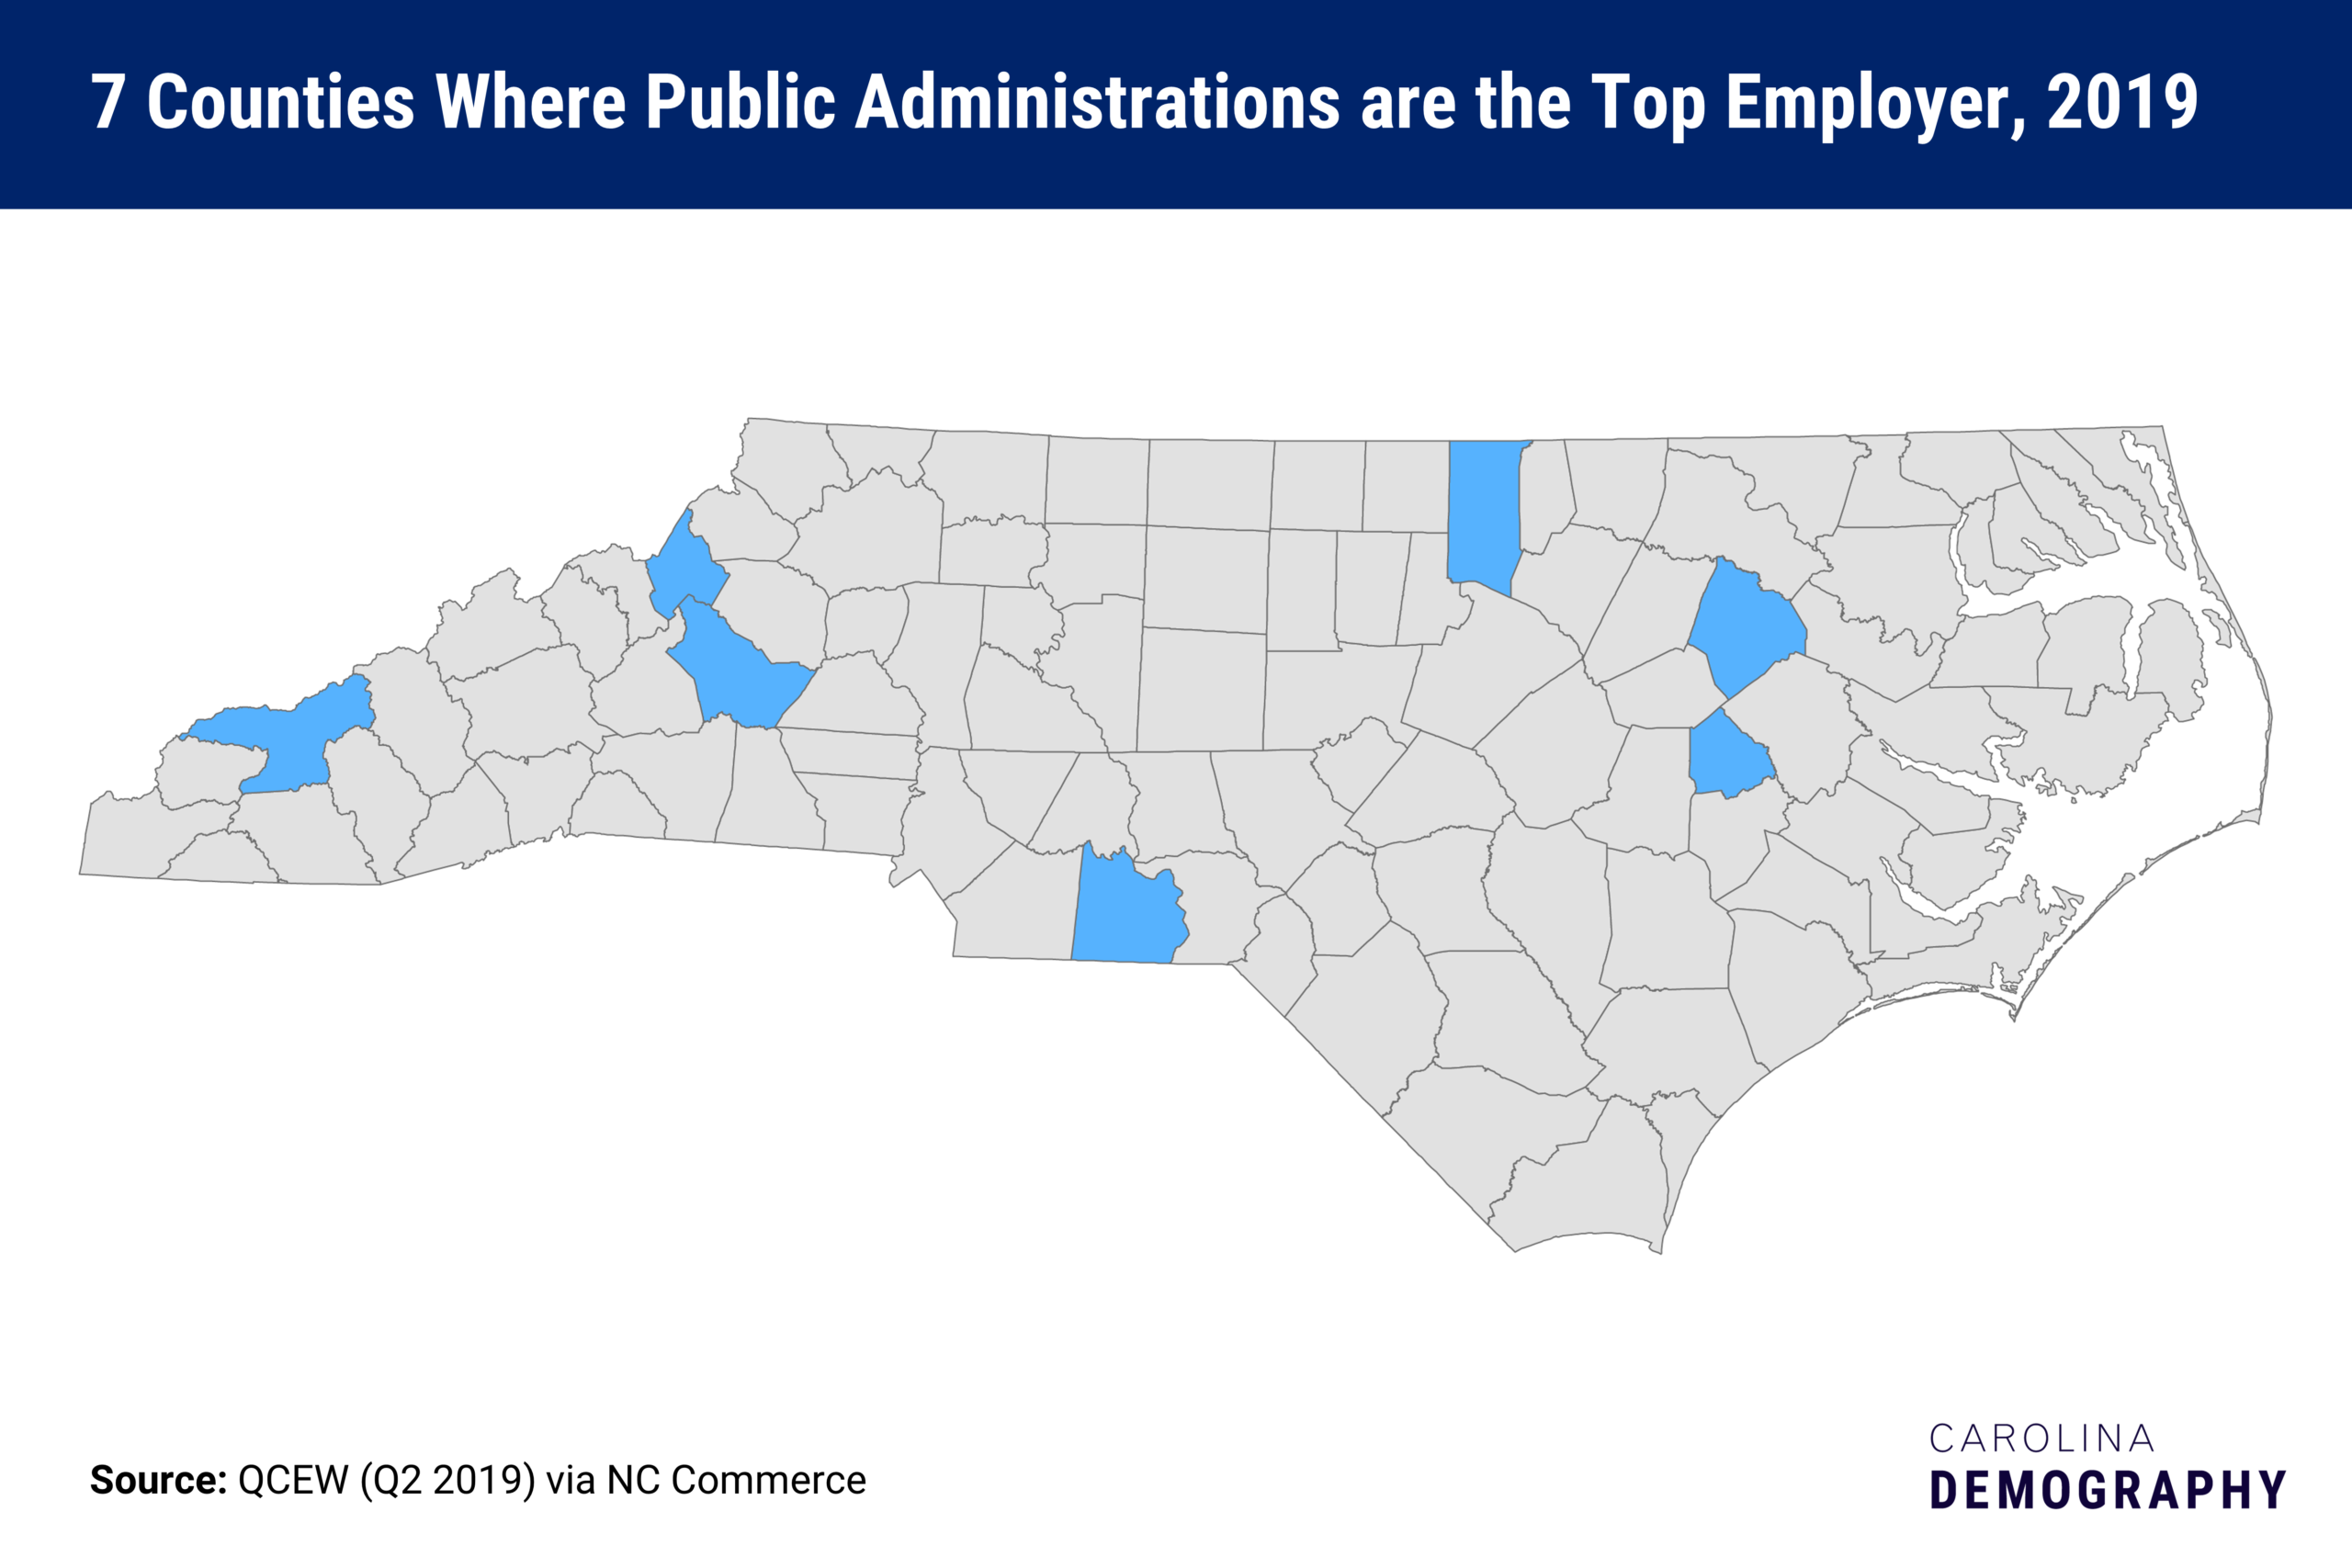 7 counties where public administrations are the top employer